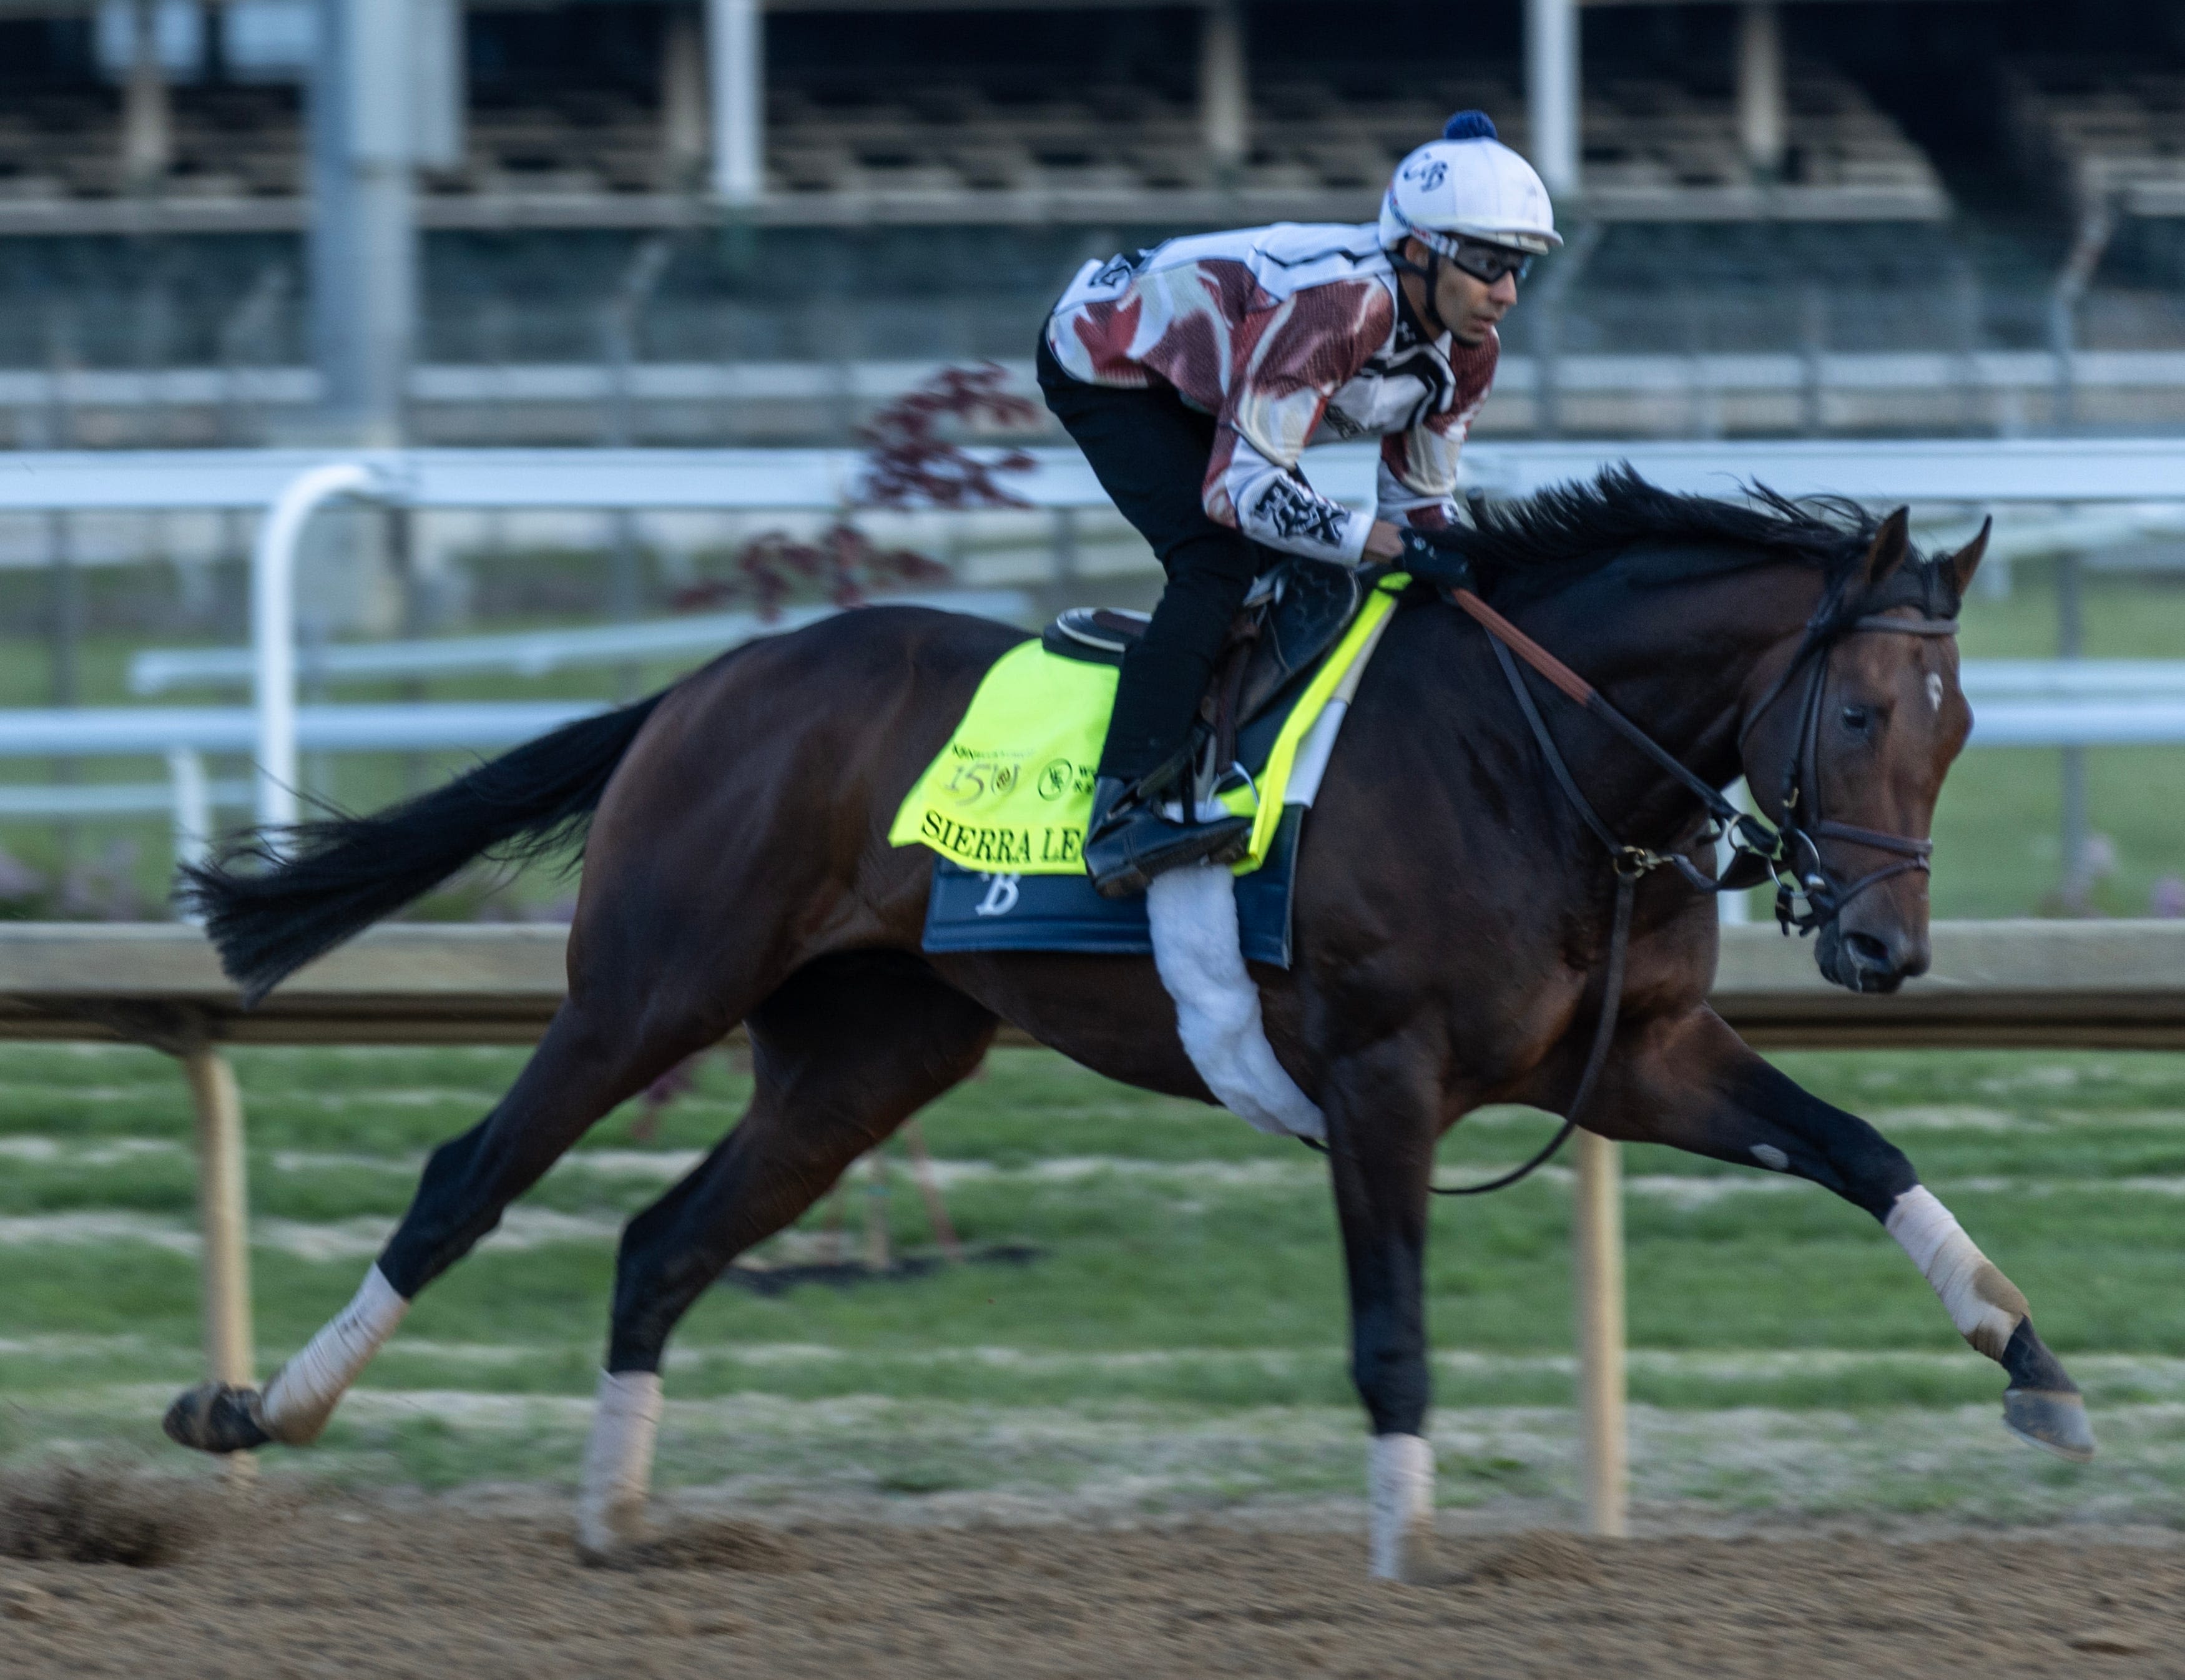 150th Kentucky Derby: What to know about competitors, how to watch and more